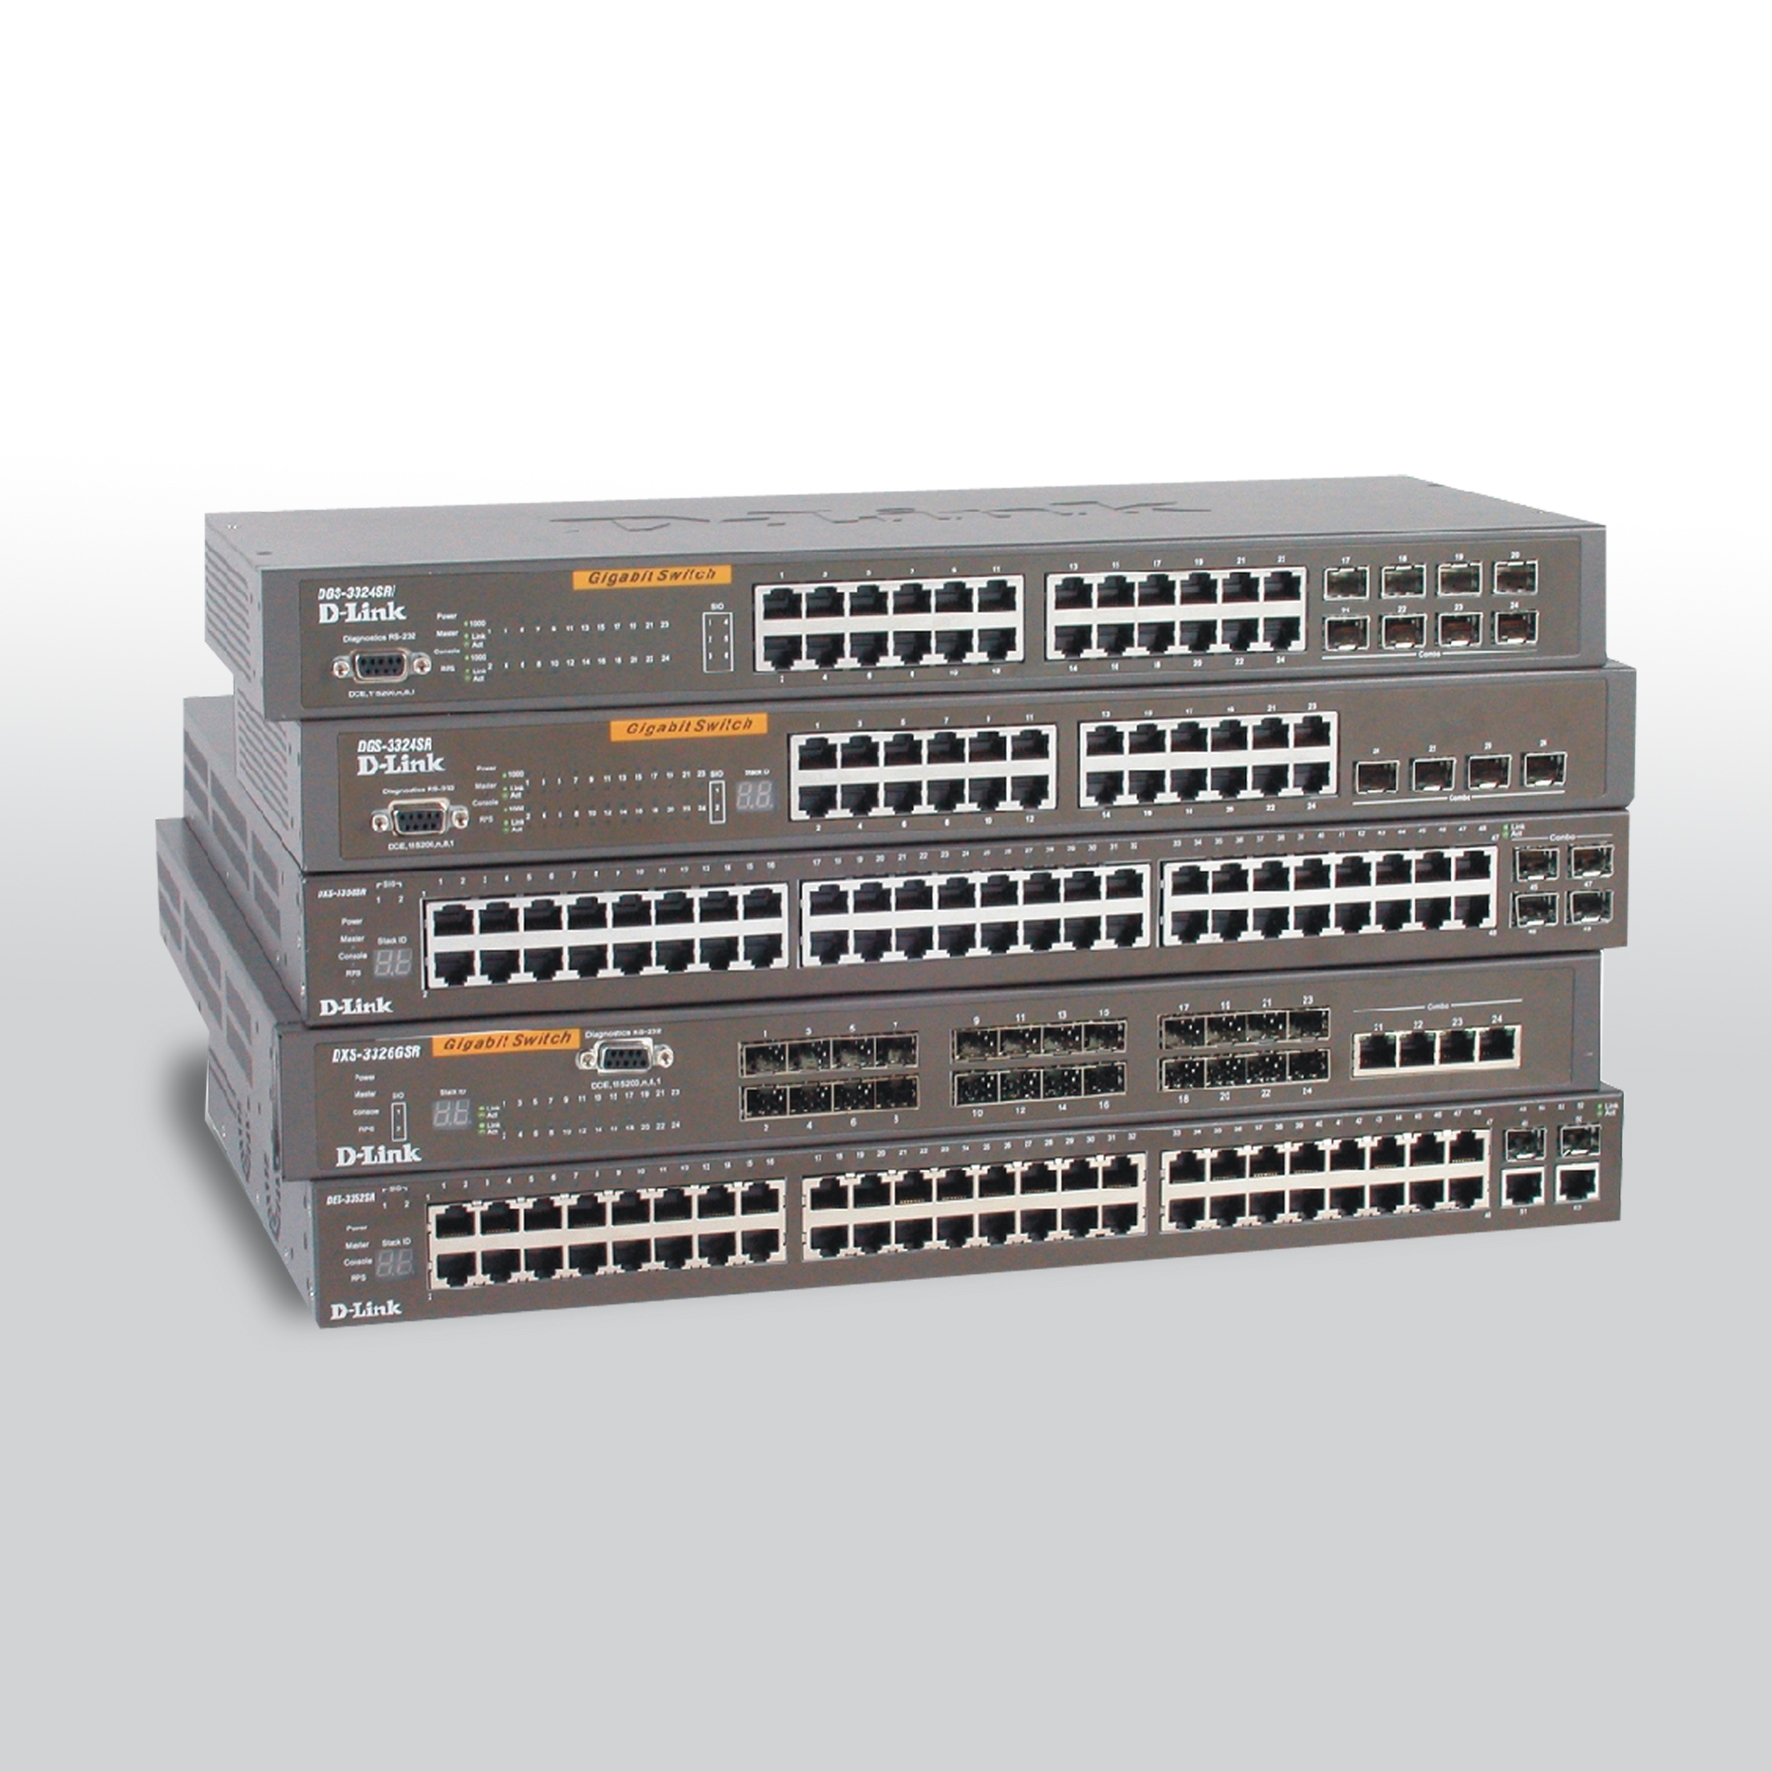 xStack Stackable L3 Ethernet Management Switch Series